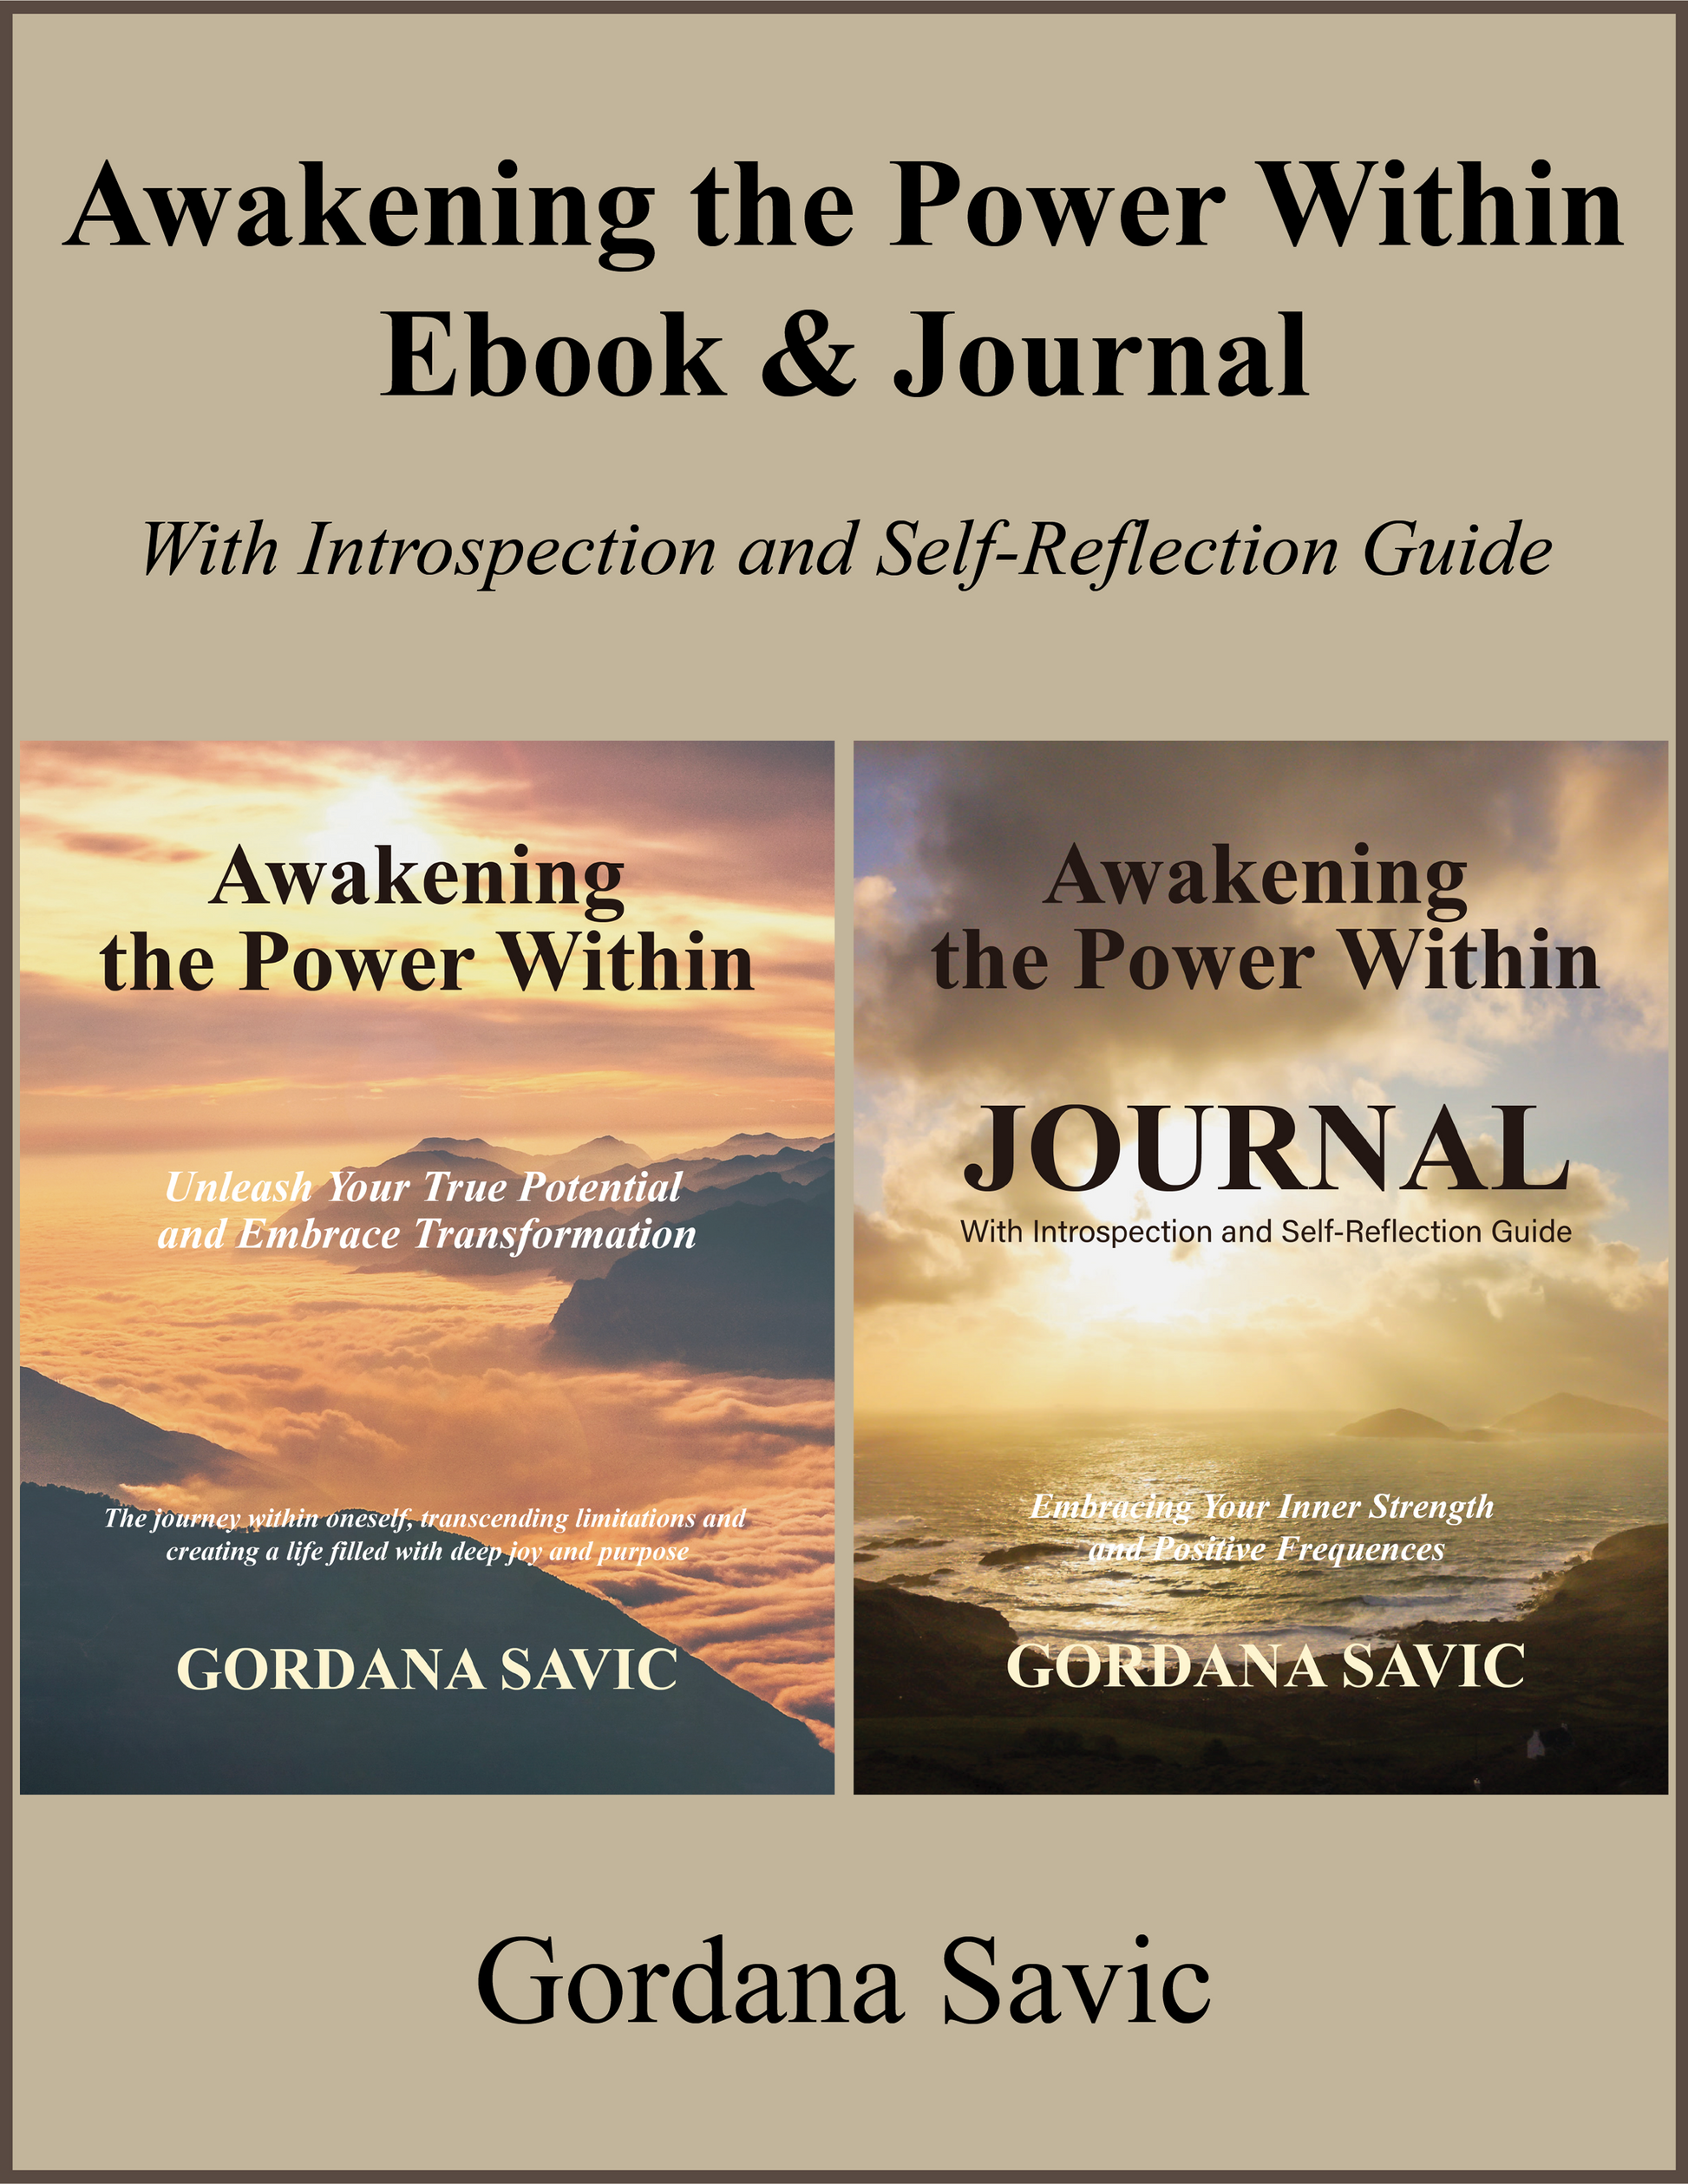 Personal Growth, Self-Discovery, Empowerment, Mindfulness, Positive Mindset, Overcoming Obstacles, Inner Strength, Transformation, Self-Reflection, Spiritual Development, Emotional Healing, Self-Empowerment, Goal Setting, Inner Wisdom, Positive Change, Spiritual, inspirational, sale, special offer, discount